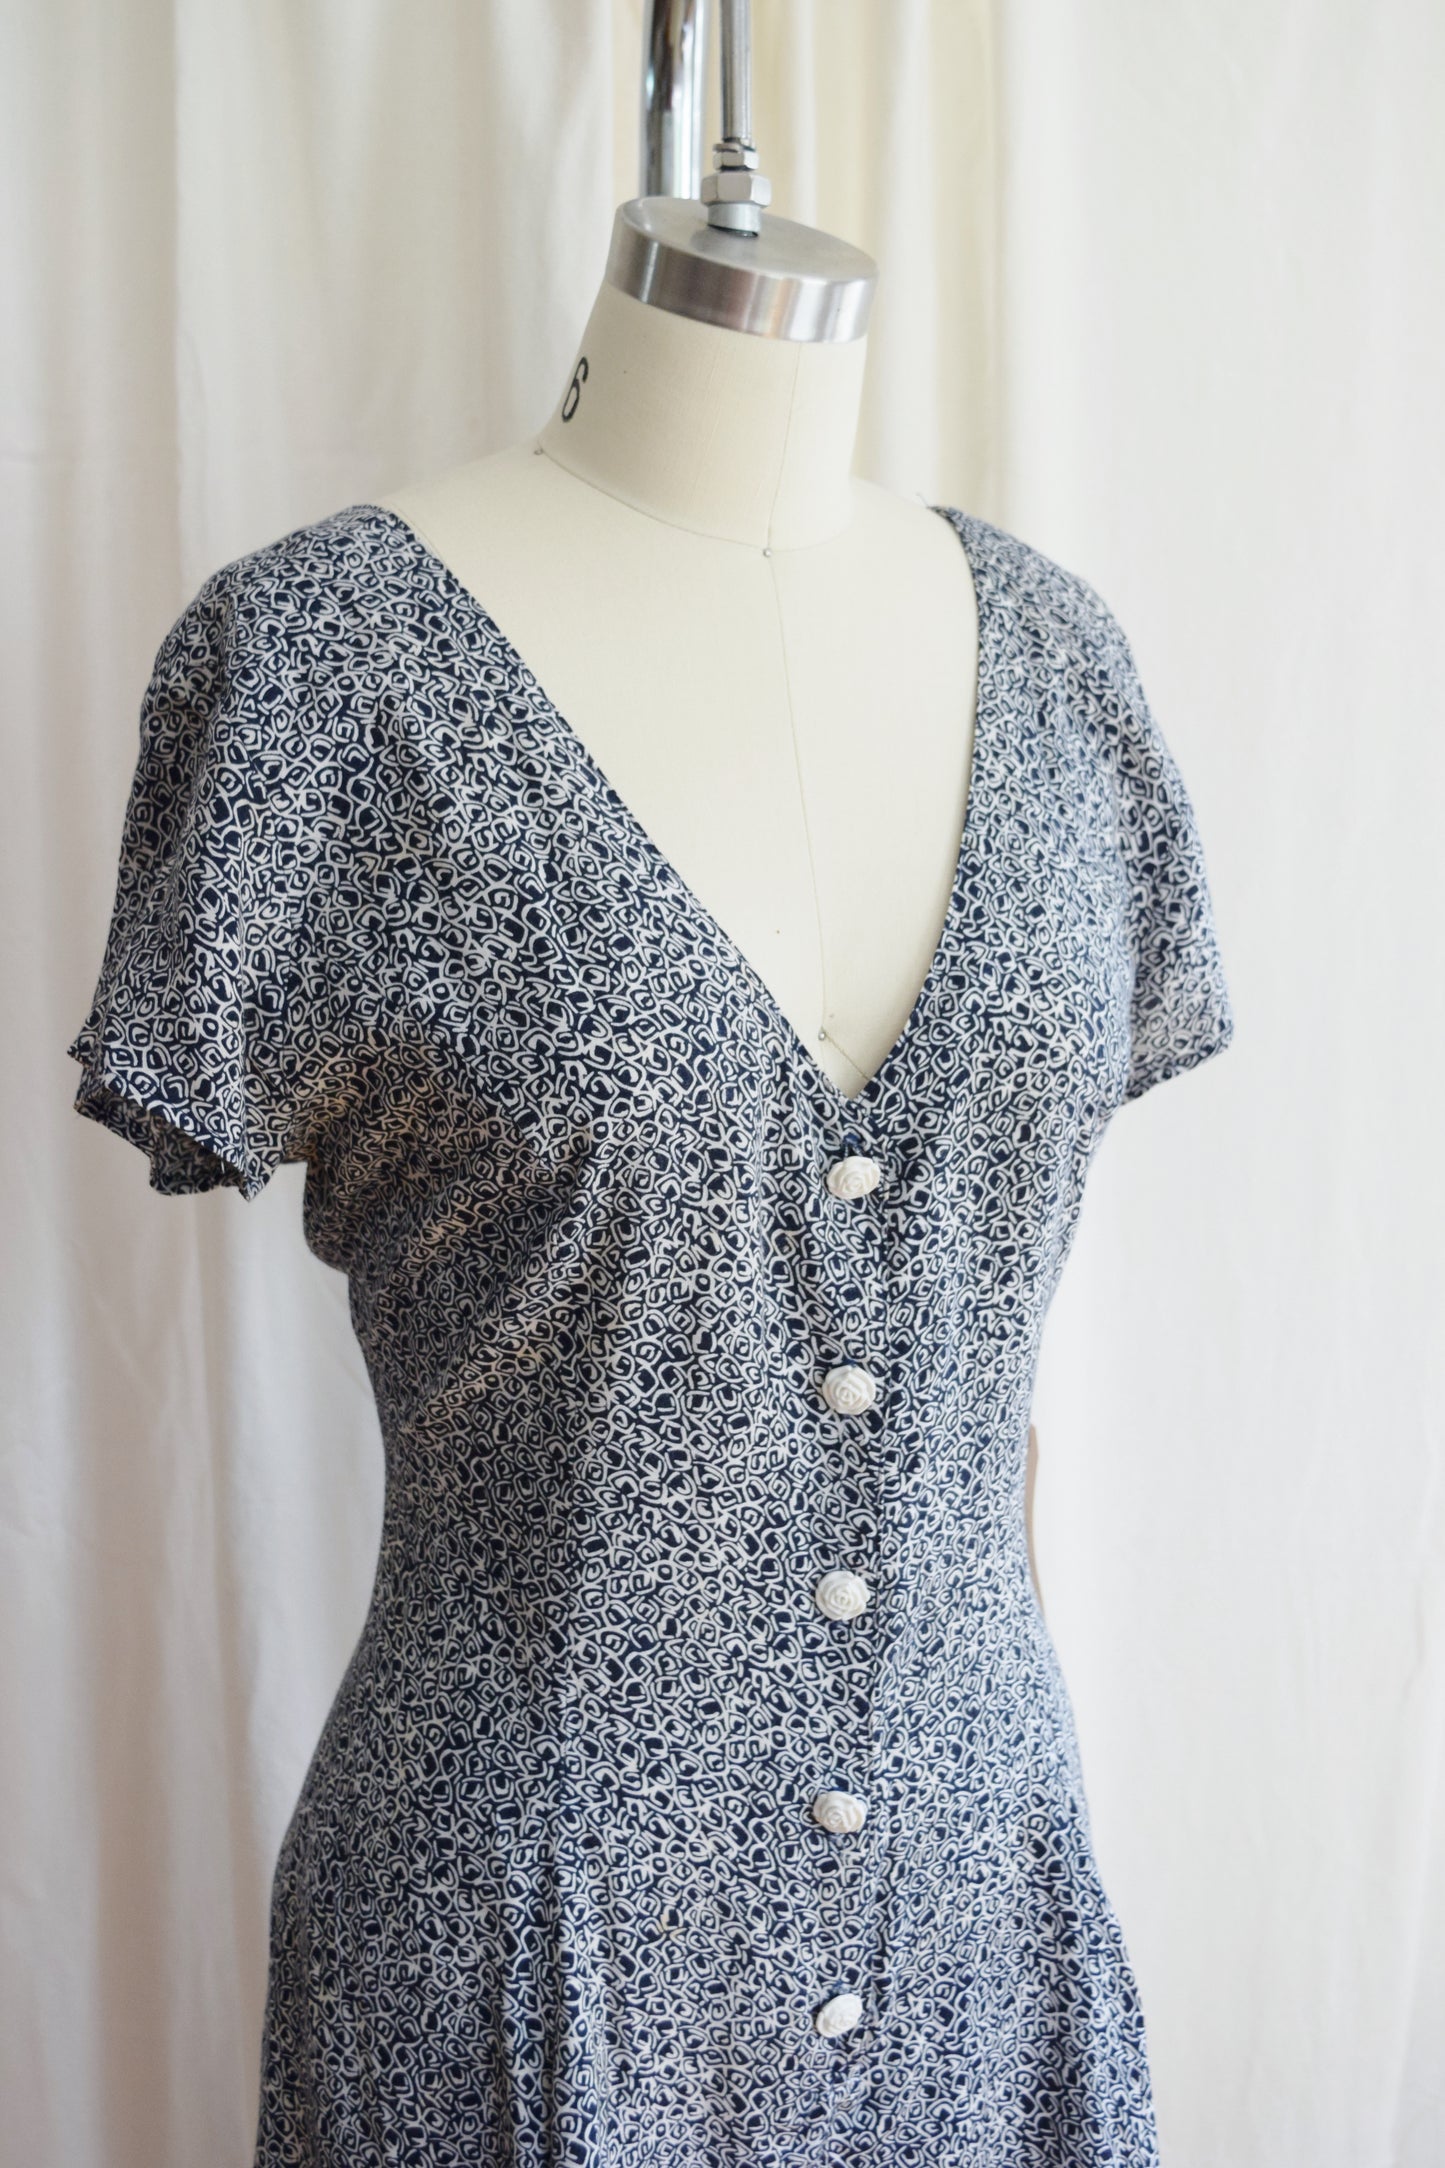 1980s Playsuit / Romper by Young Edwardian